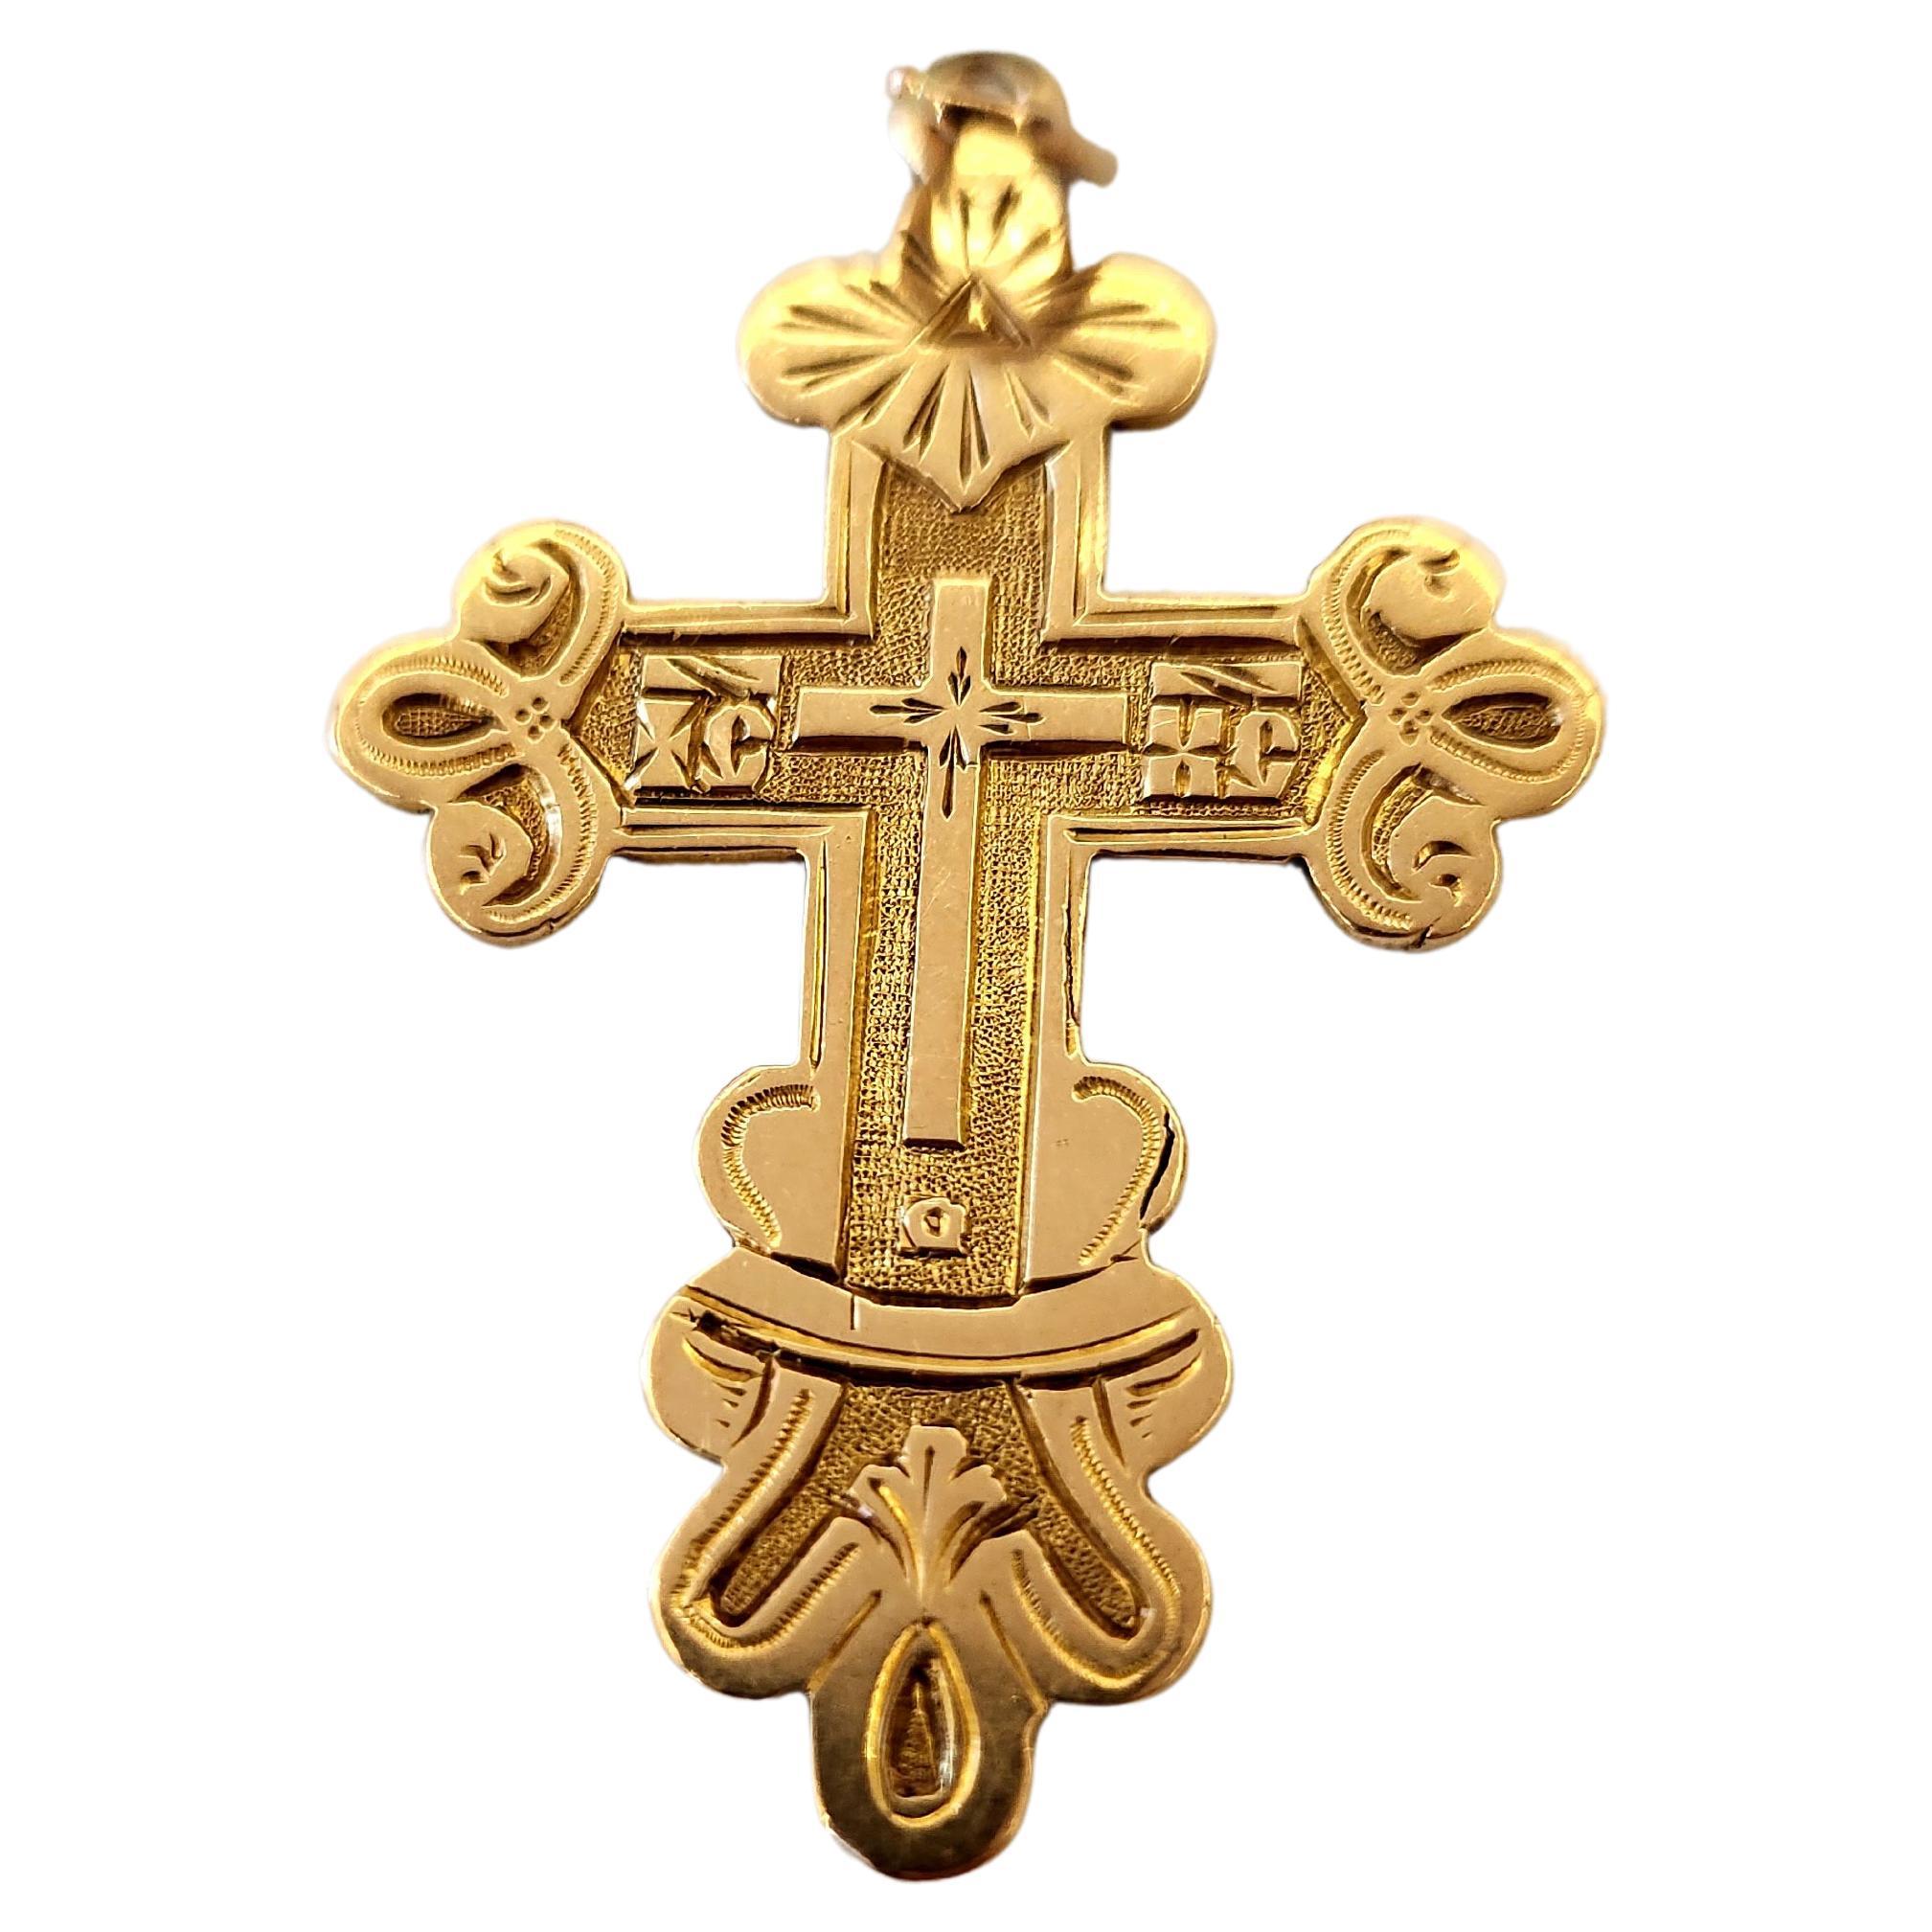 Antique russian 14k gold cross pendant engraved on back (spasi sokhrani) or save and protect cross pendant was made in moscow 1888.c imperial russian era with a total gold weight of 5.75 grams and lenght of 5.5cm including the bail cross is hall